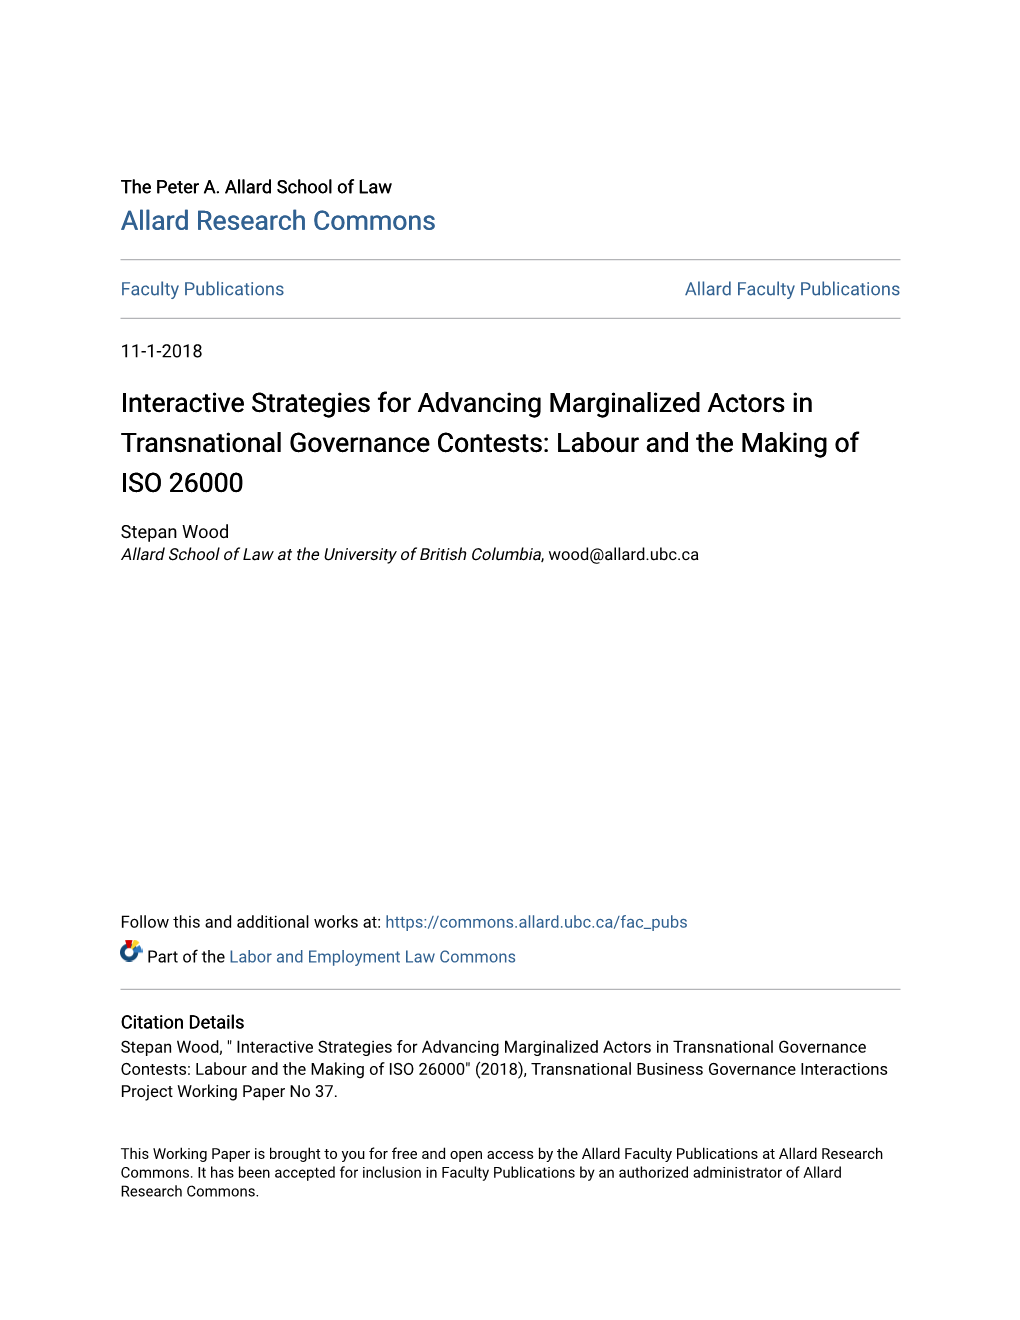 Interactive Strategies for Advancing Marginalized Actors in Transnational Governance Contests: Labour and the Making of ISO 26000